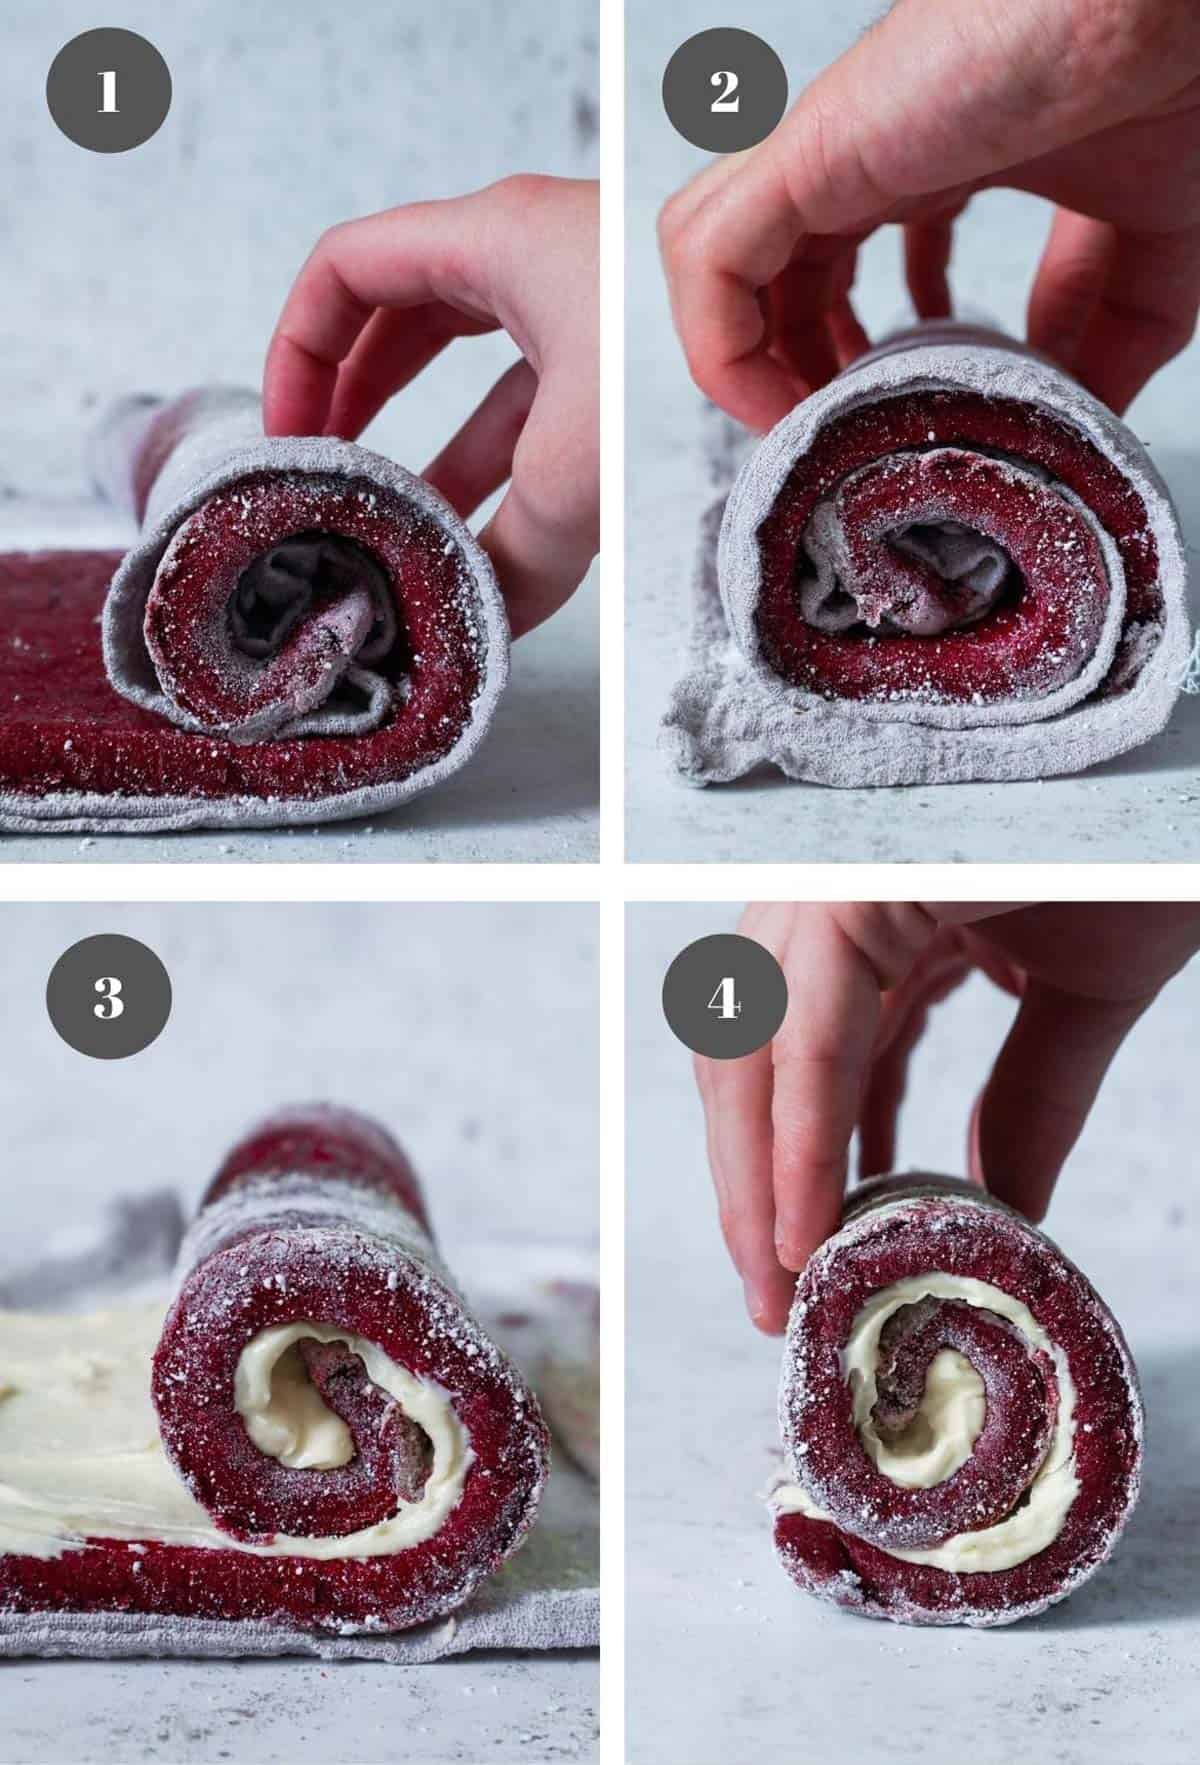 Rolling a red cake roll with frosting on it.